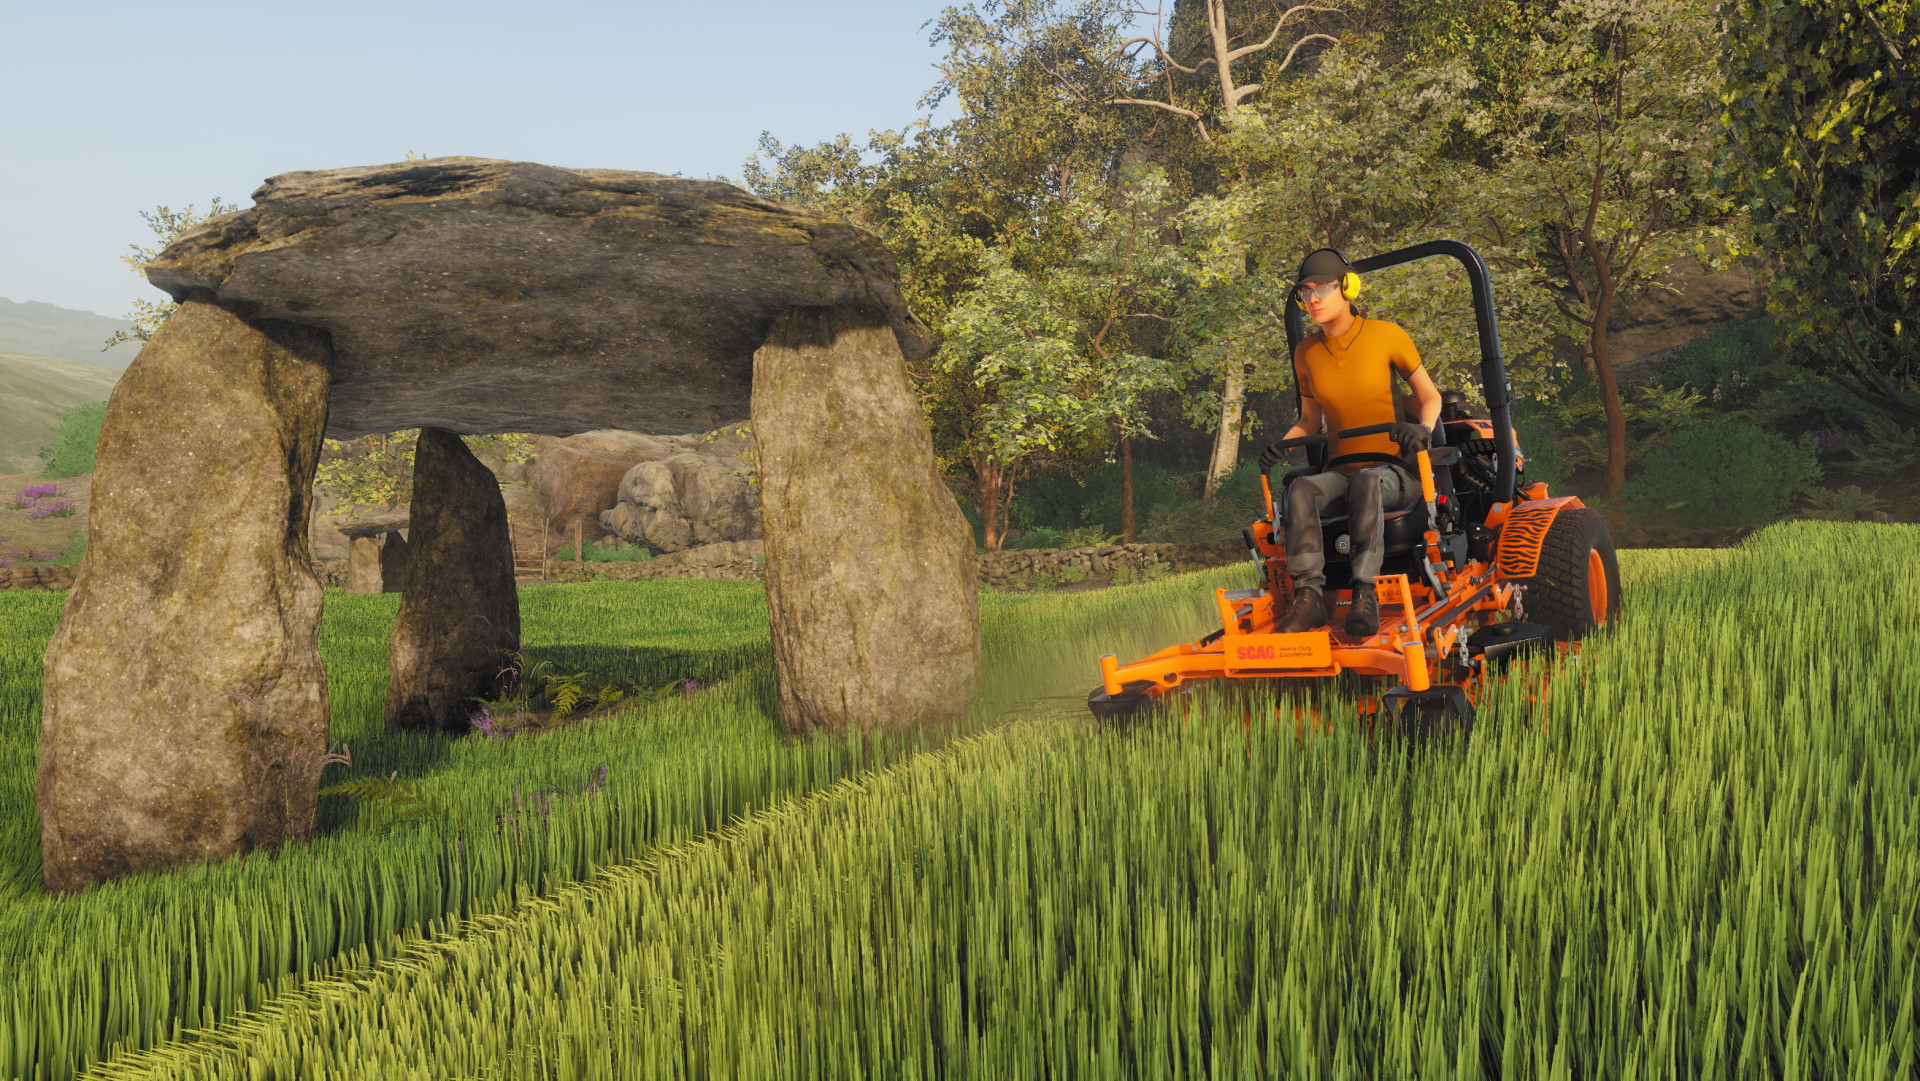  Cut the sacred grass of ancient kings and druids in this Lawn Mowing Simulator DLC 